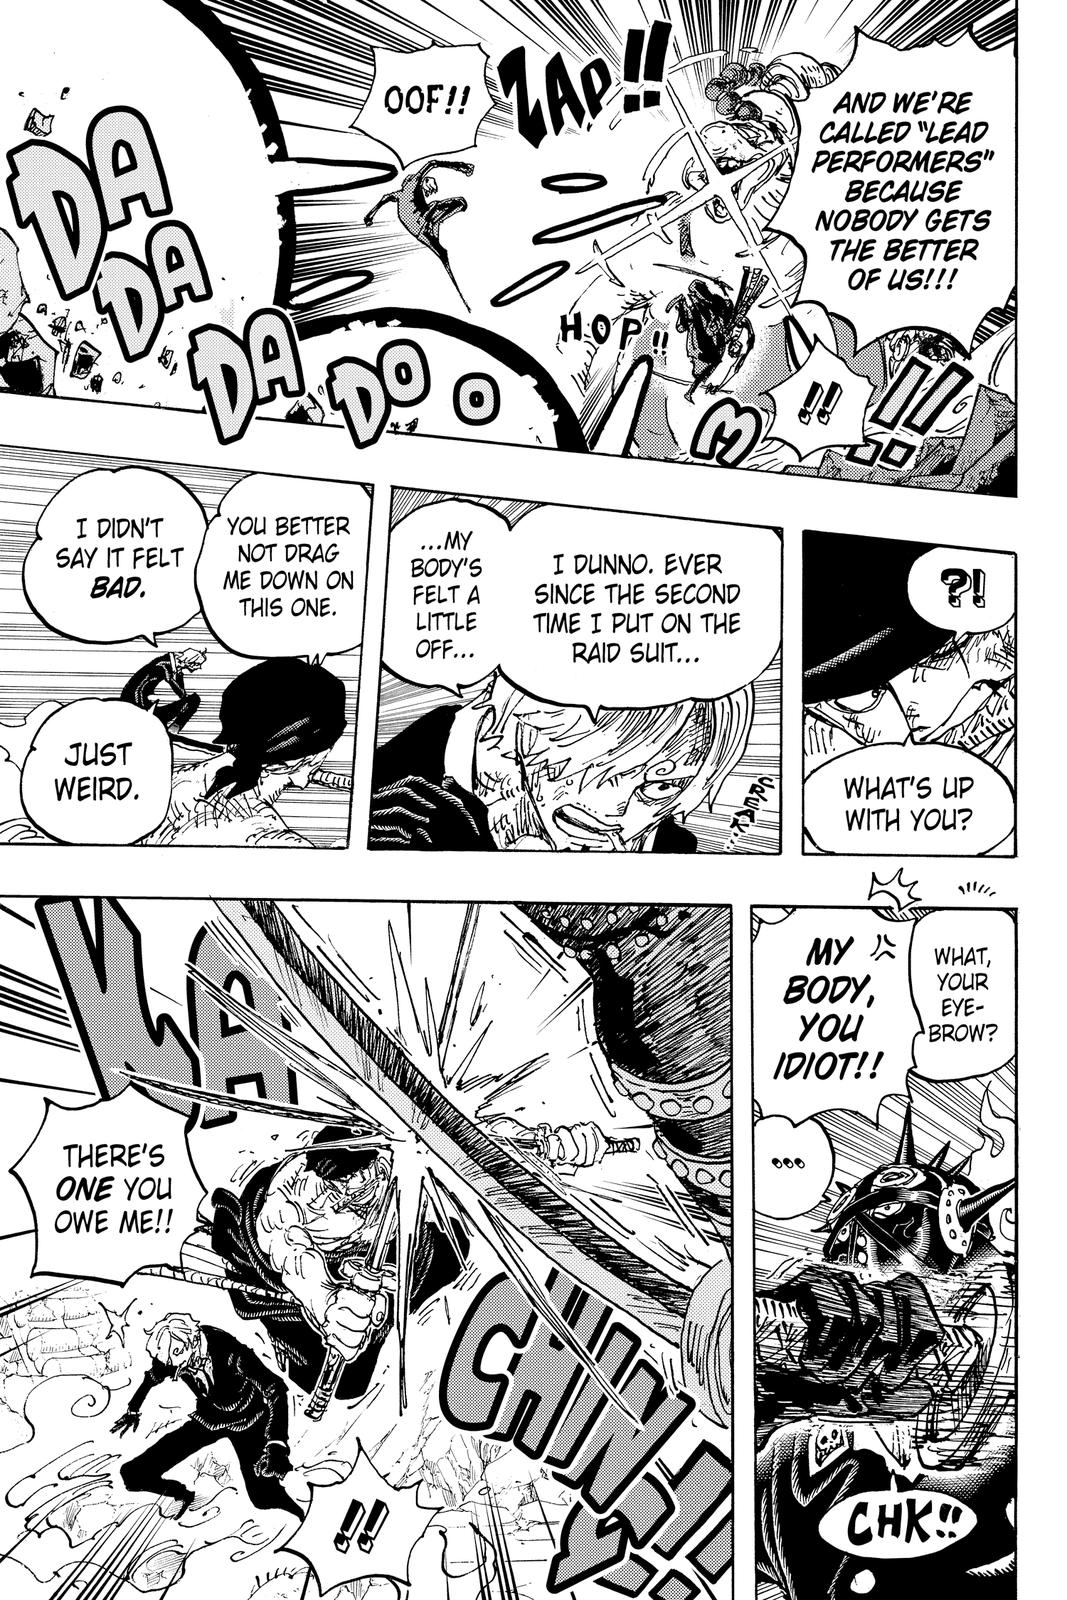 Spoiler - One Piece Chapter 1028 Spoilers Discussion | Page 308 | Worstgen